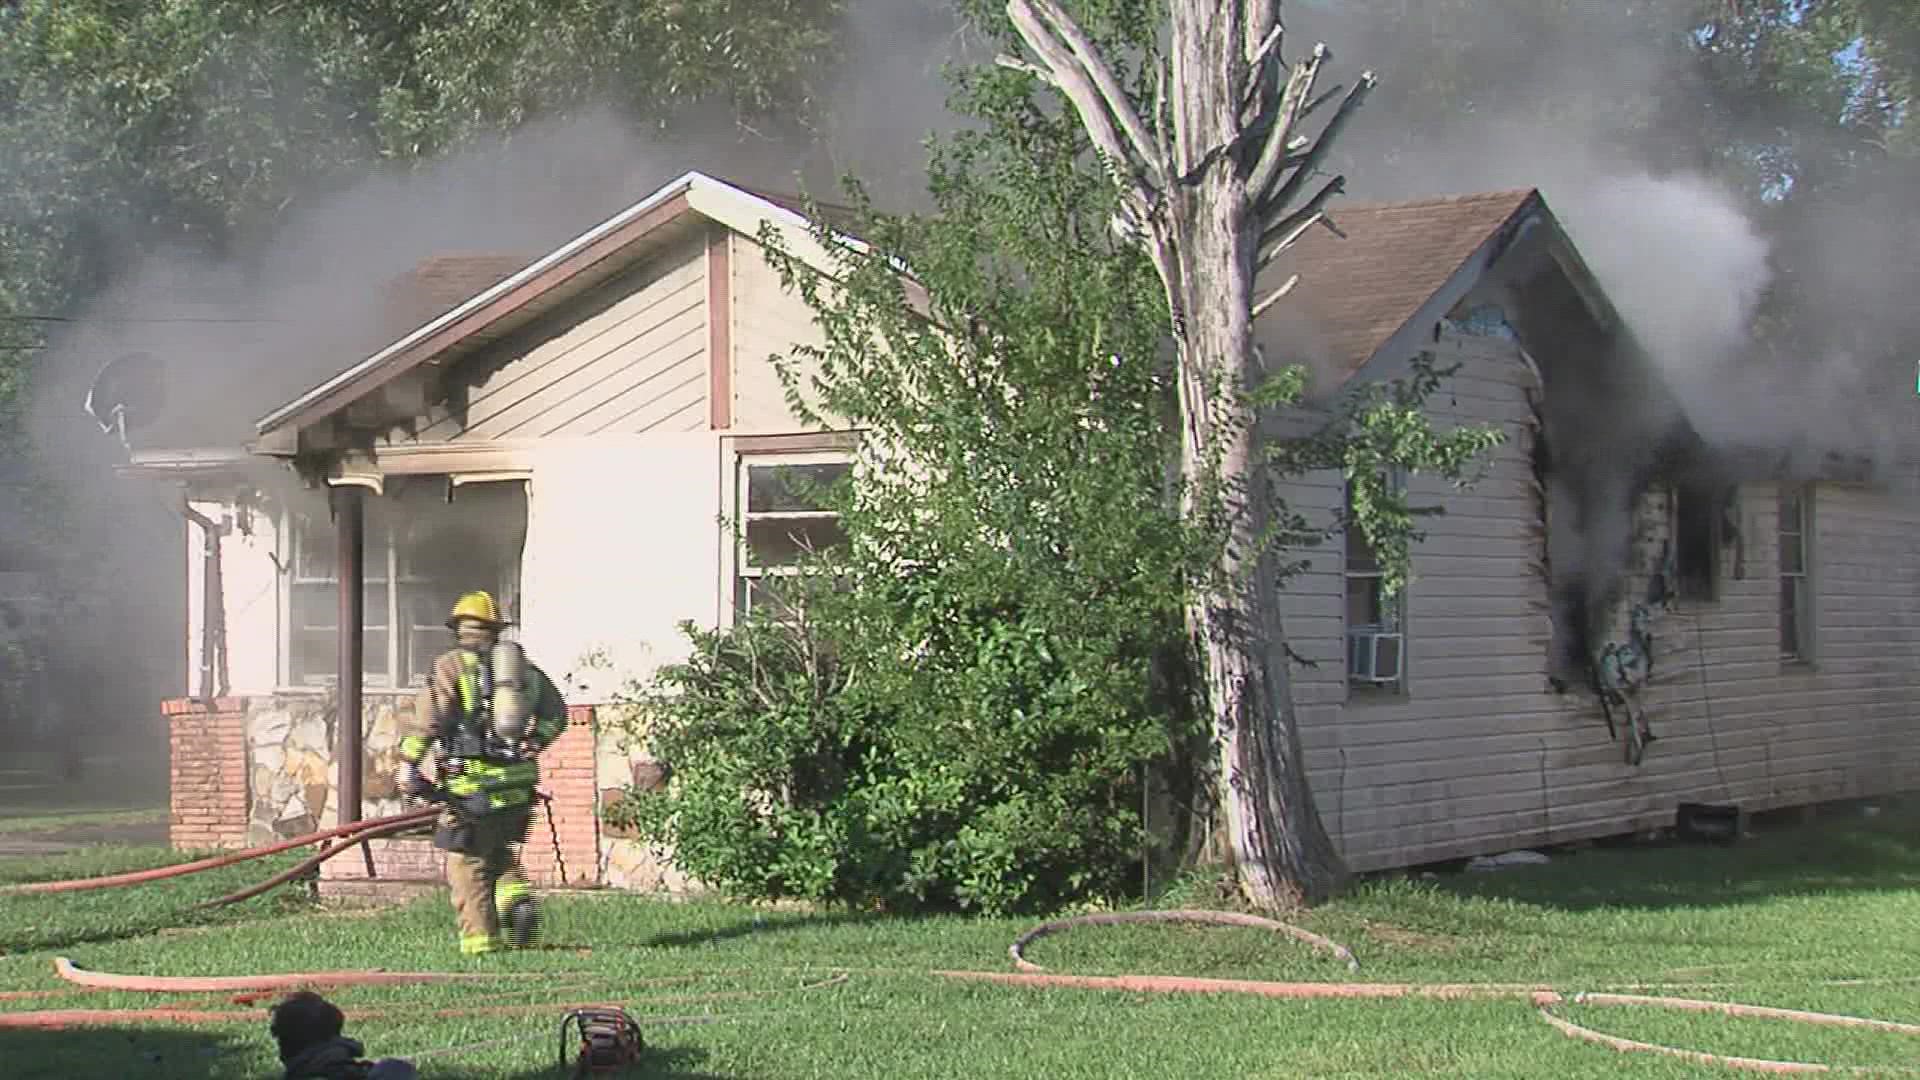 A neighbor called 911 to report the fire at about 9 a.m. Thursday morning.